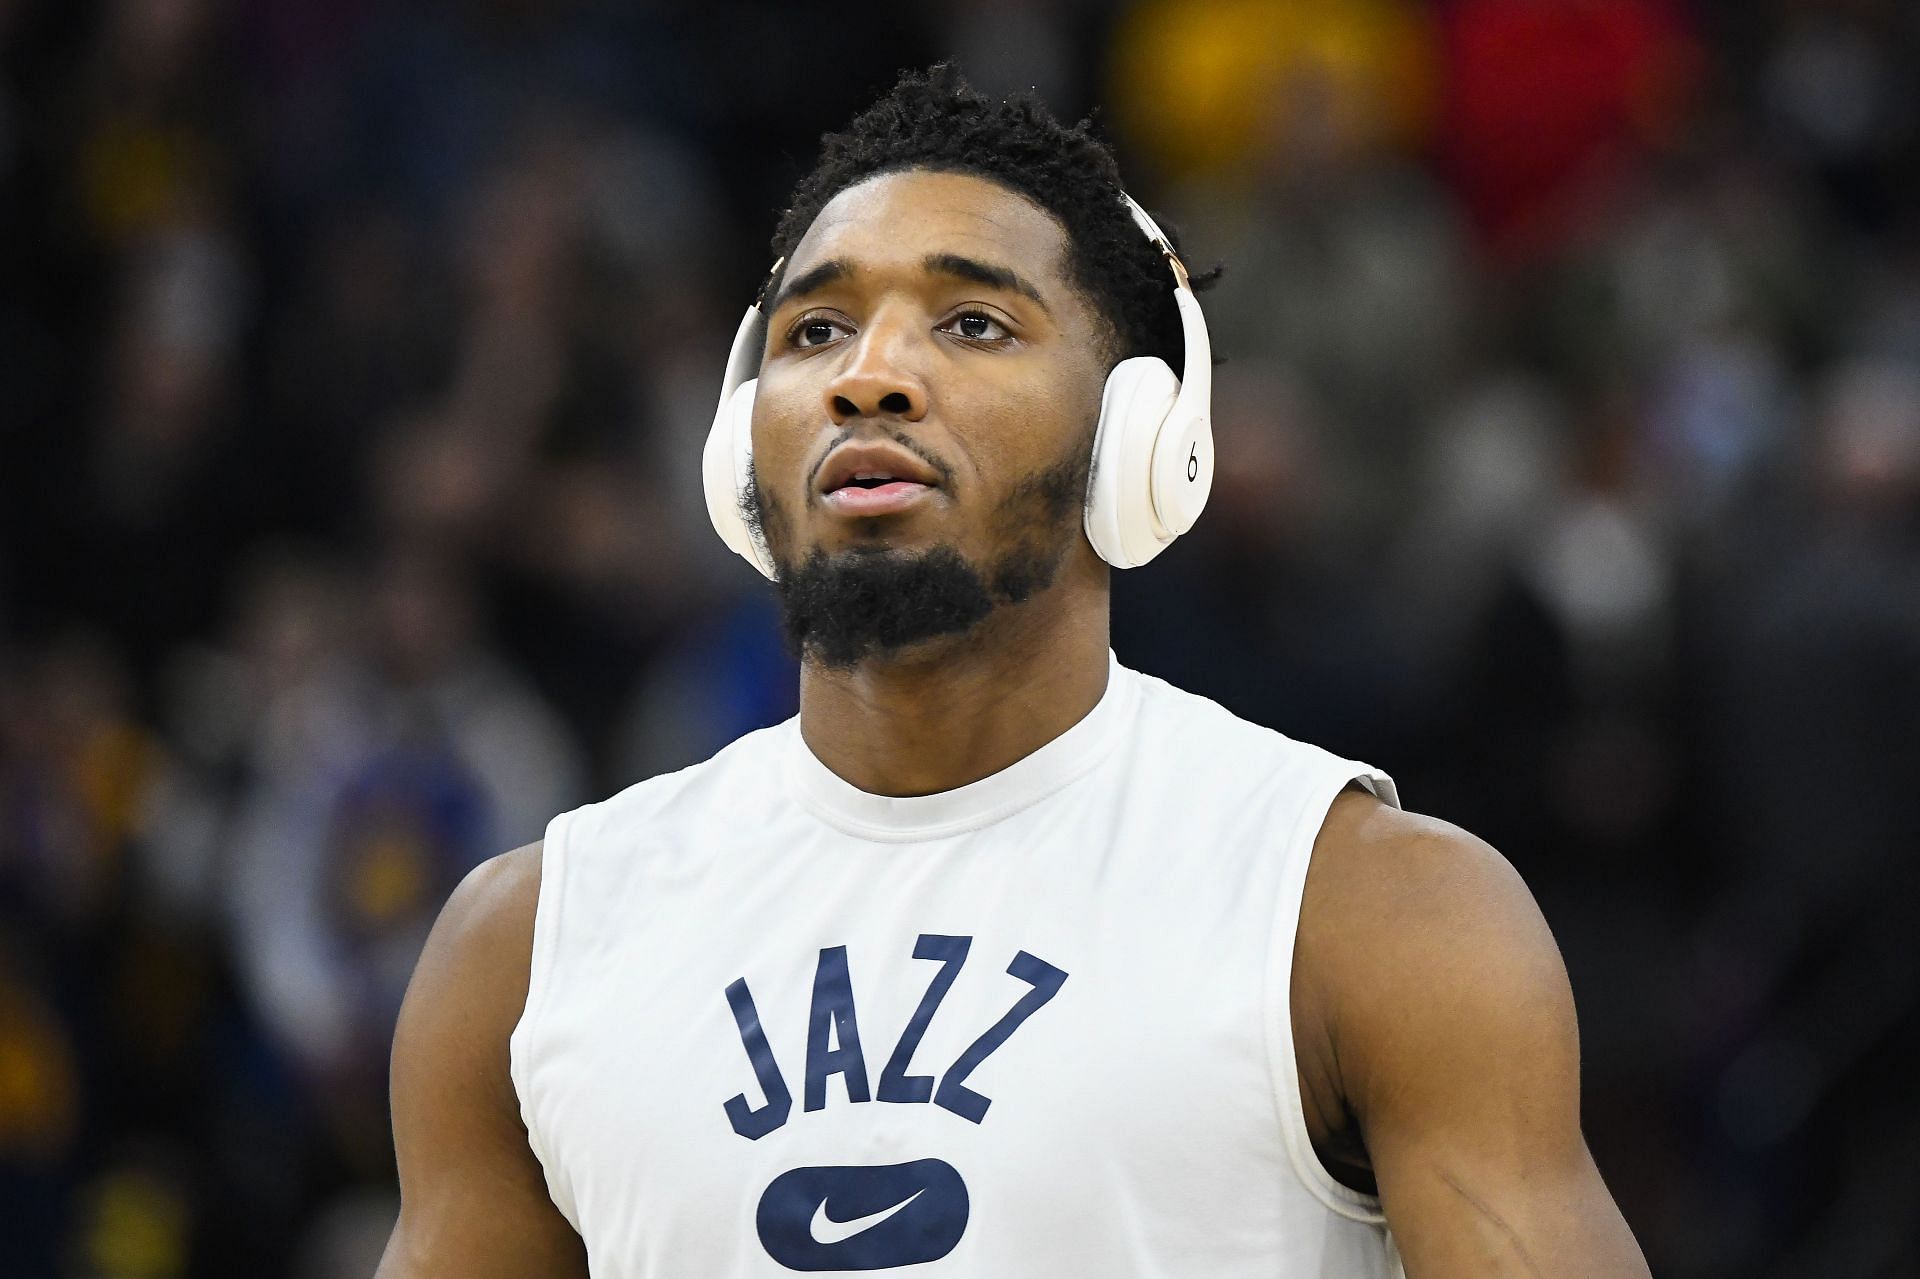 Donovan Mitchell will be available for Jazz for their game against the Knicks on Sunday.